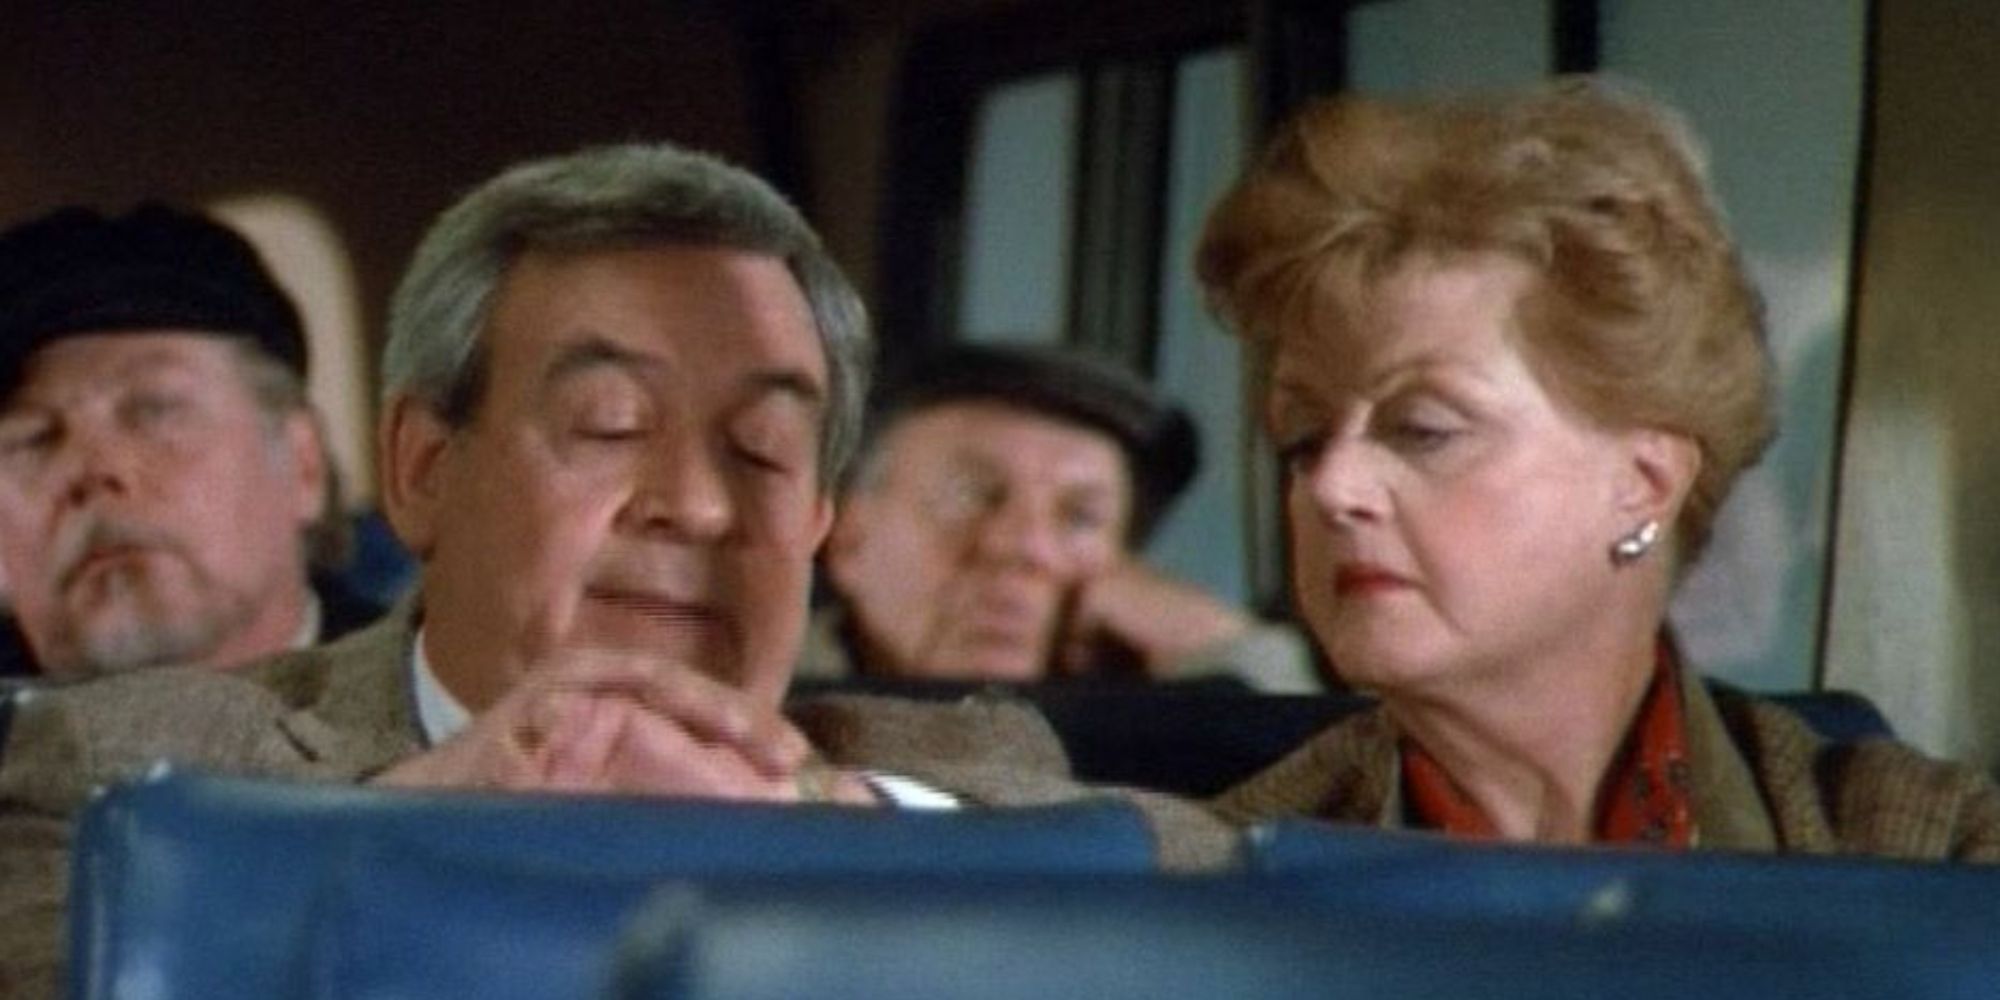 Amos and Jessica sit on the bus together in Murder, She Wrote